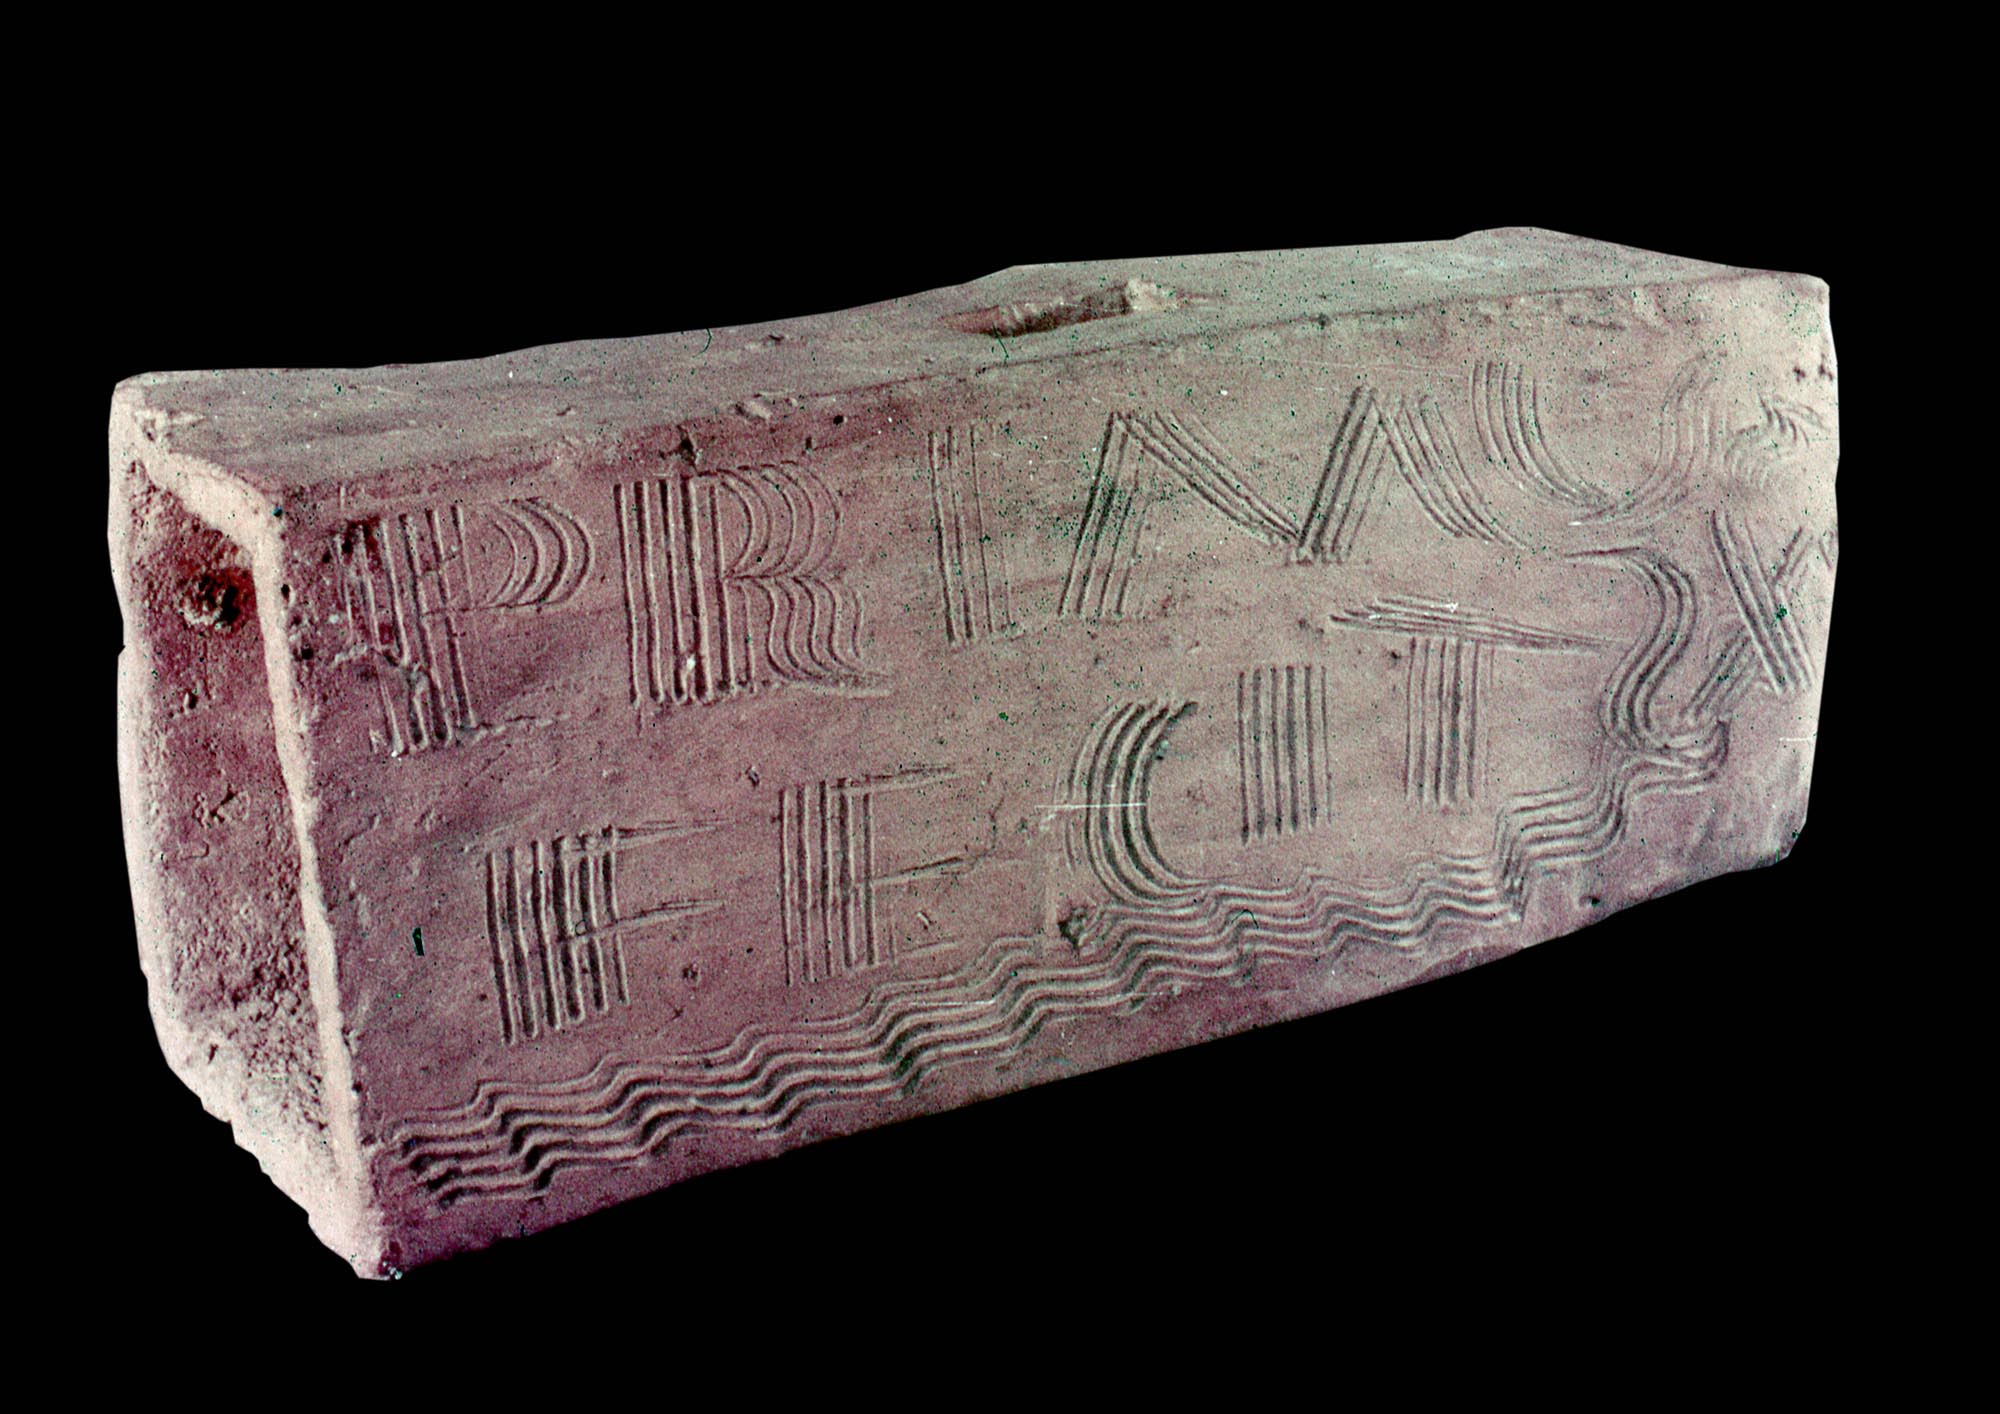 A Roman tile maker from Leicester has written the words PRIMUS FECIT X, meaning ‘Primus has made ten tiles’, on this box flue before it was fired - Leicester Arts & Museums Service